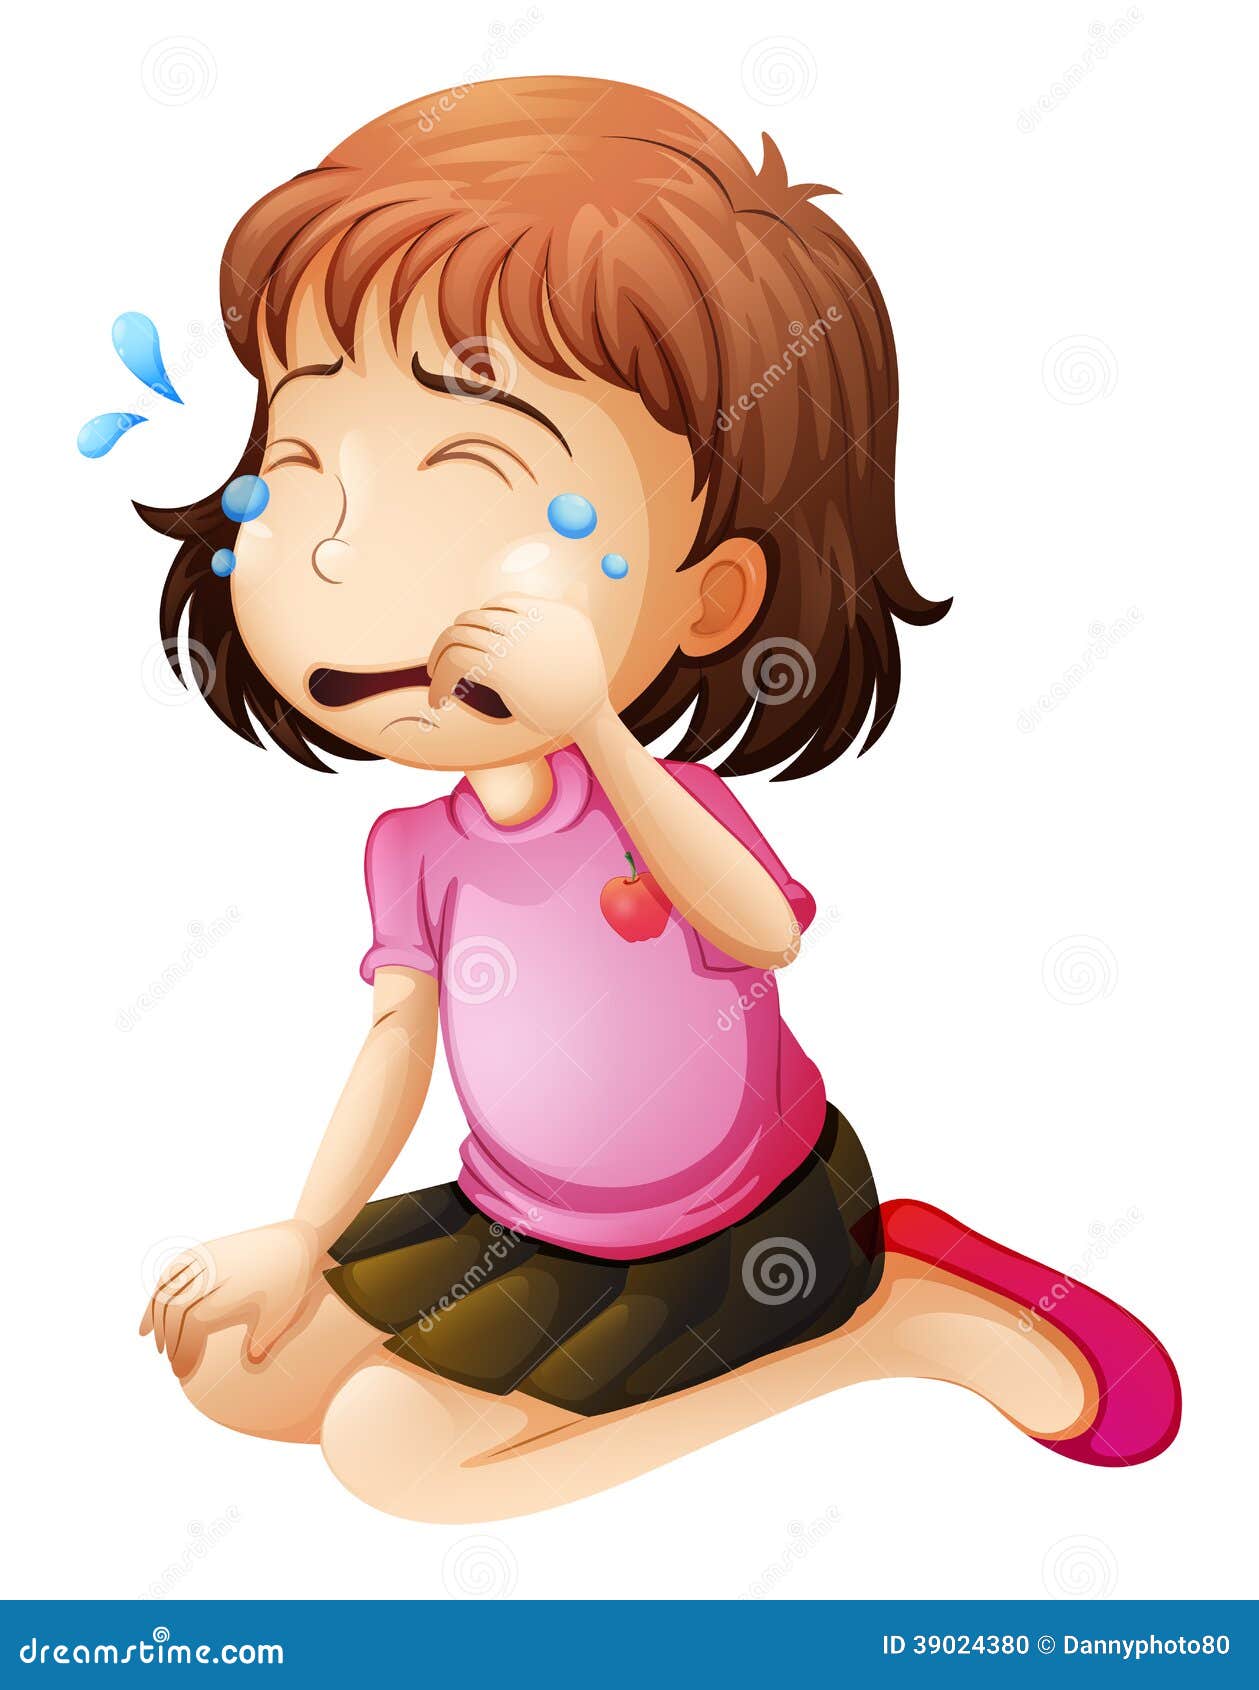 clipart of a girl crying - photo #11